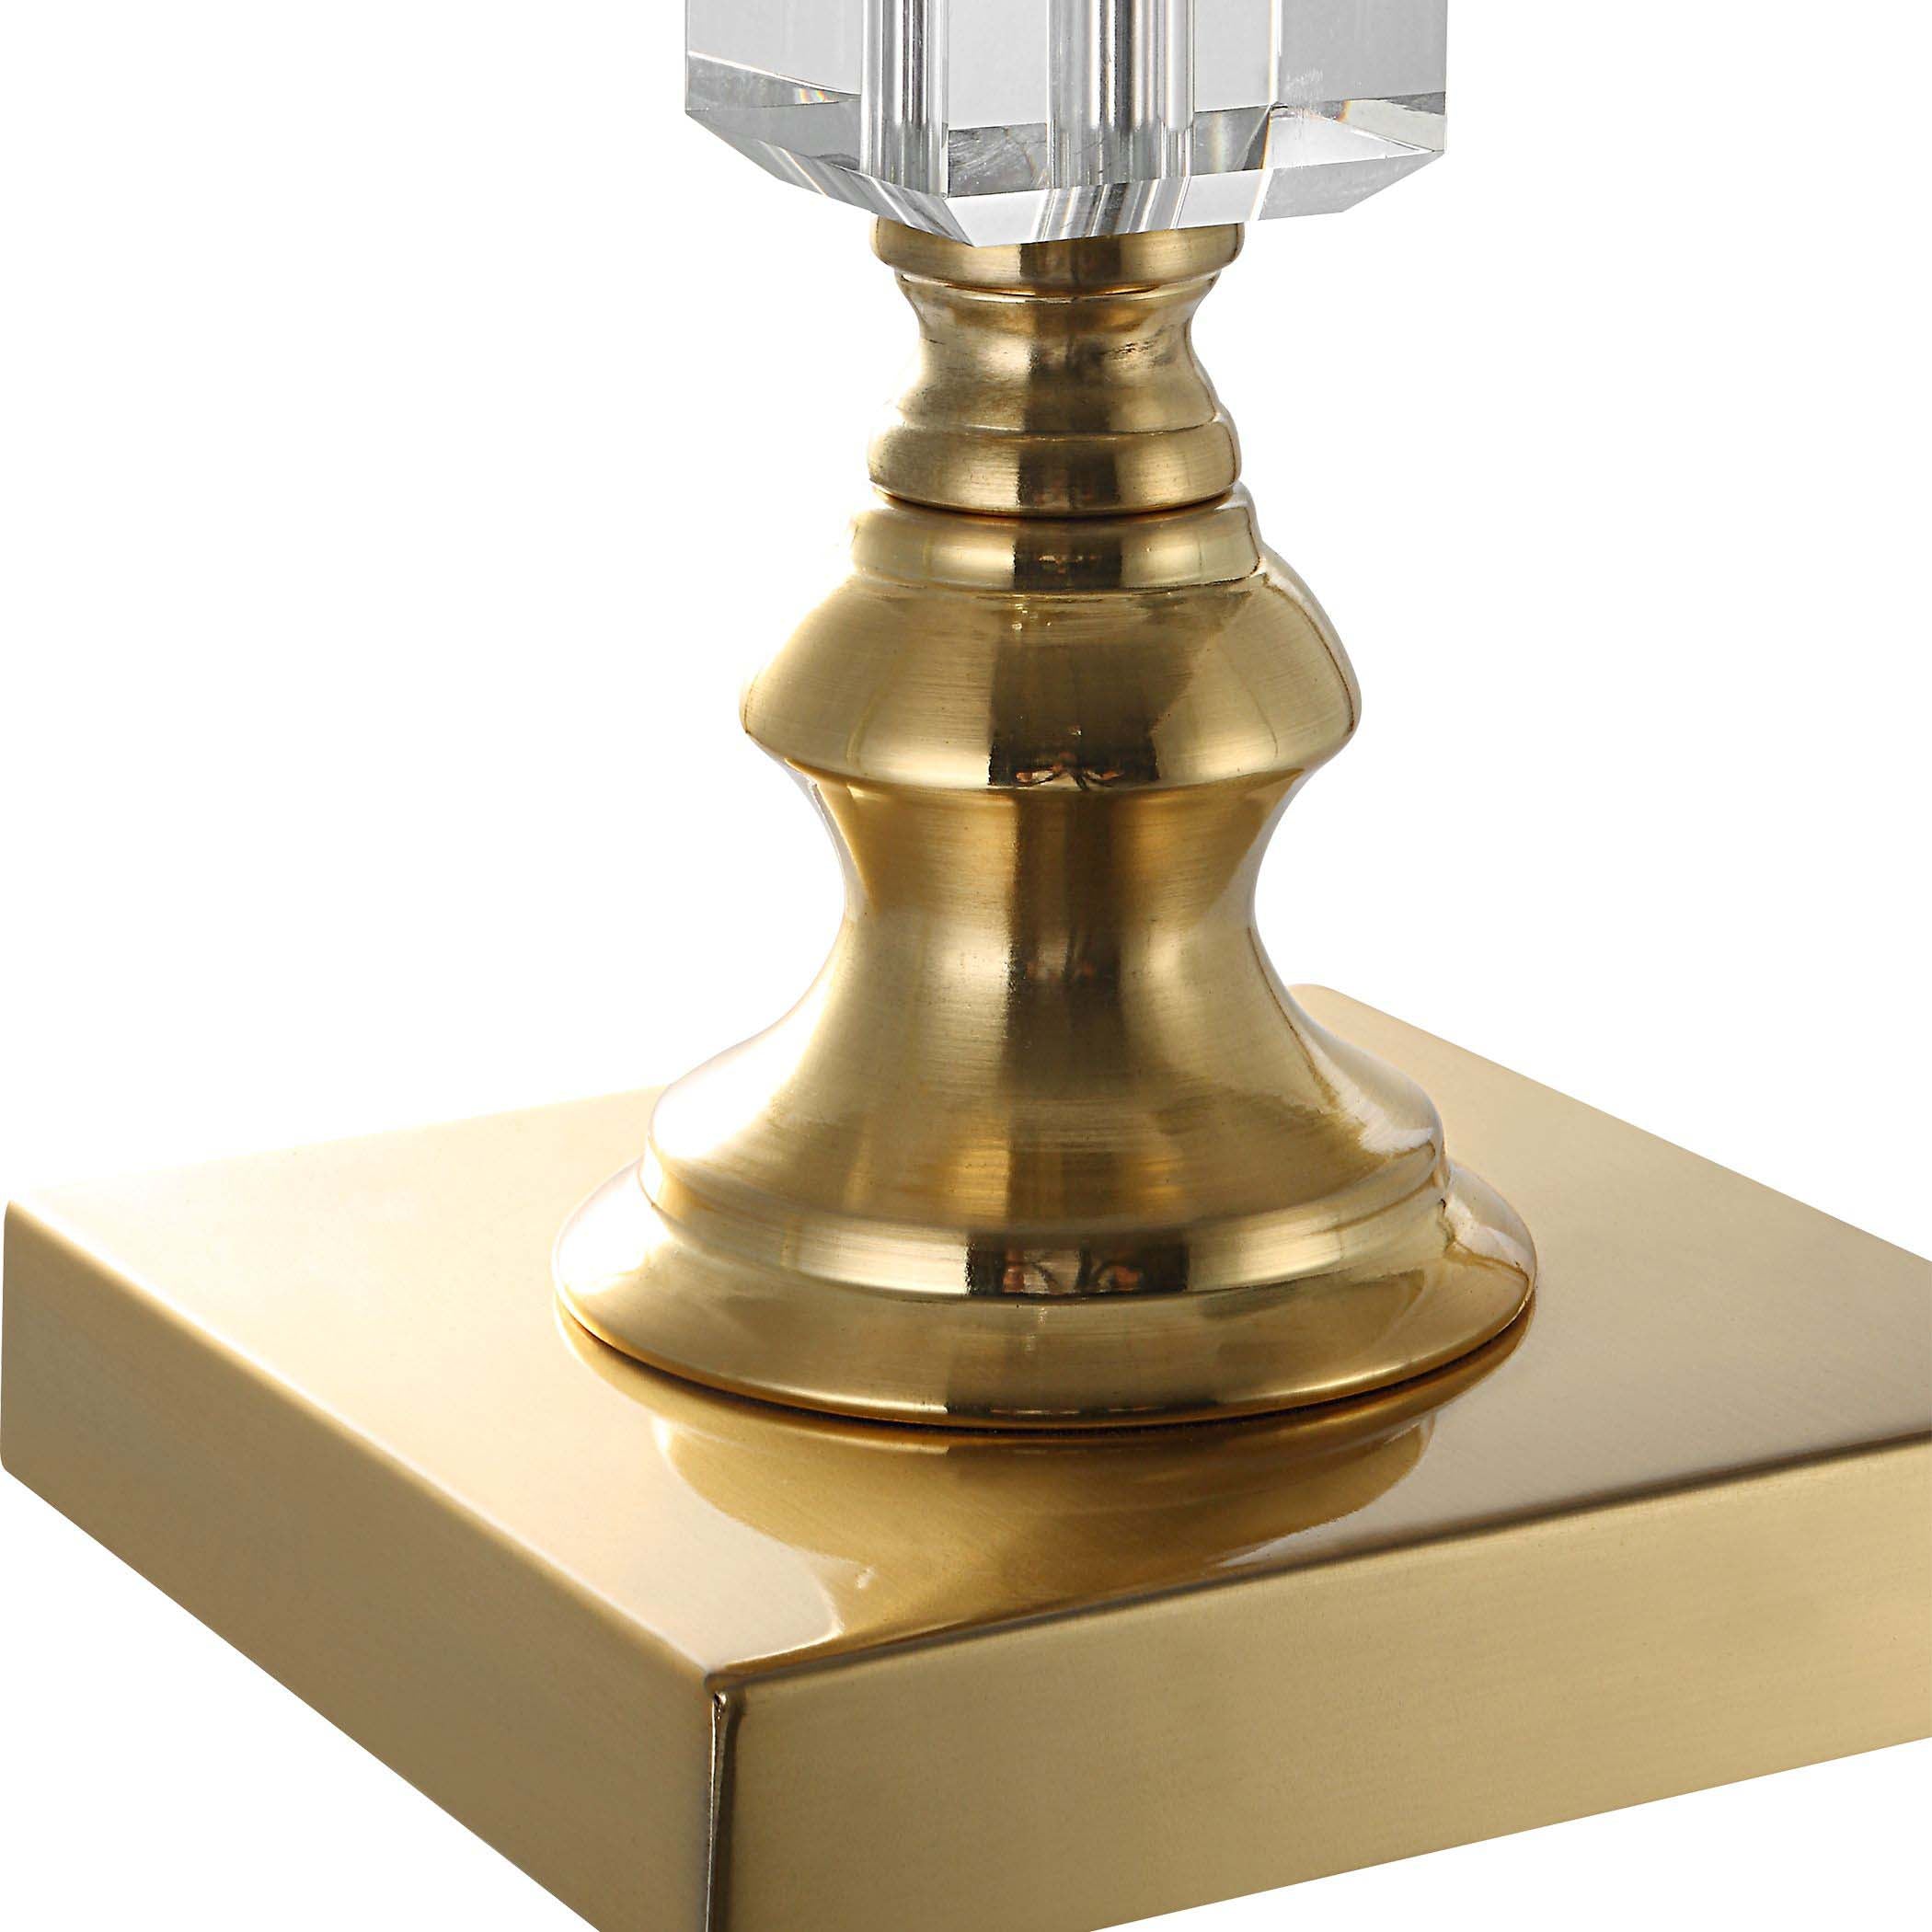 Decor Market Table Lamp Brass Plated Finish